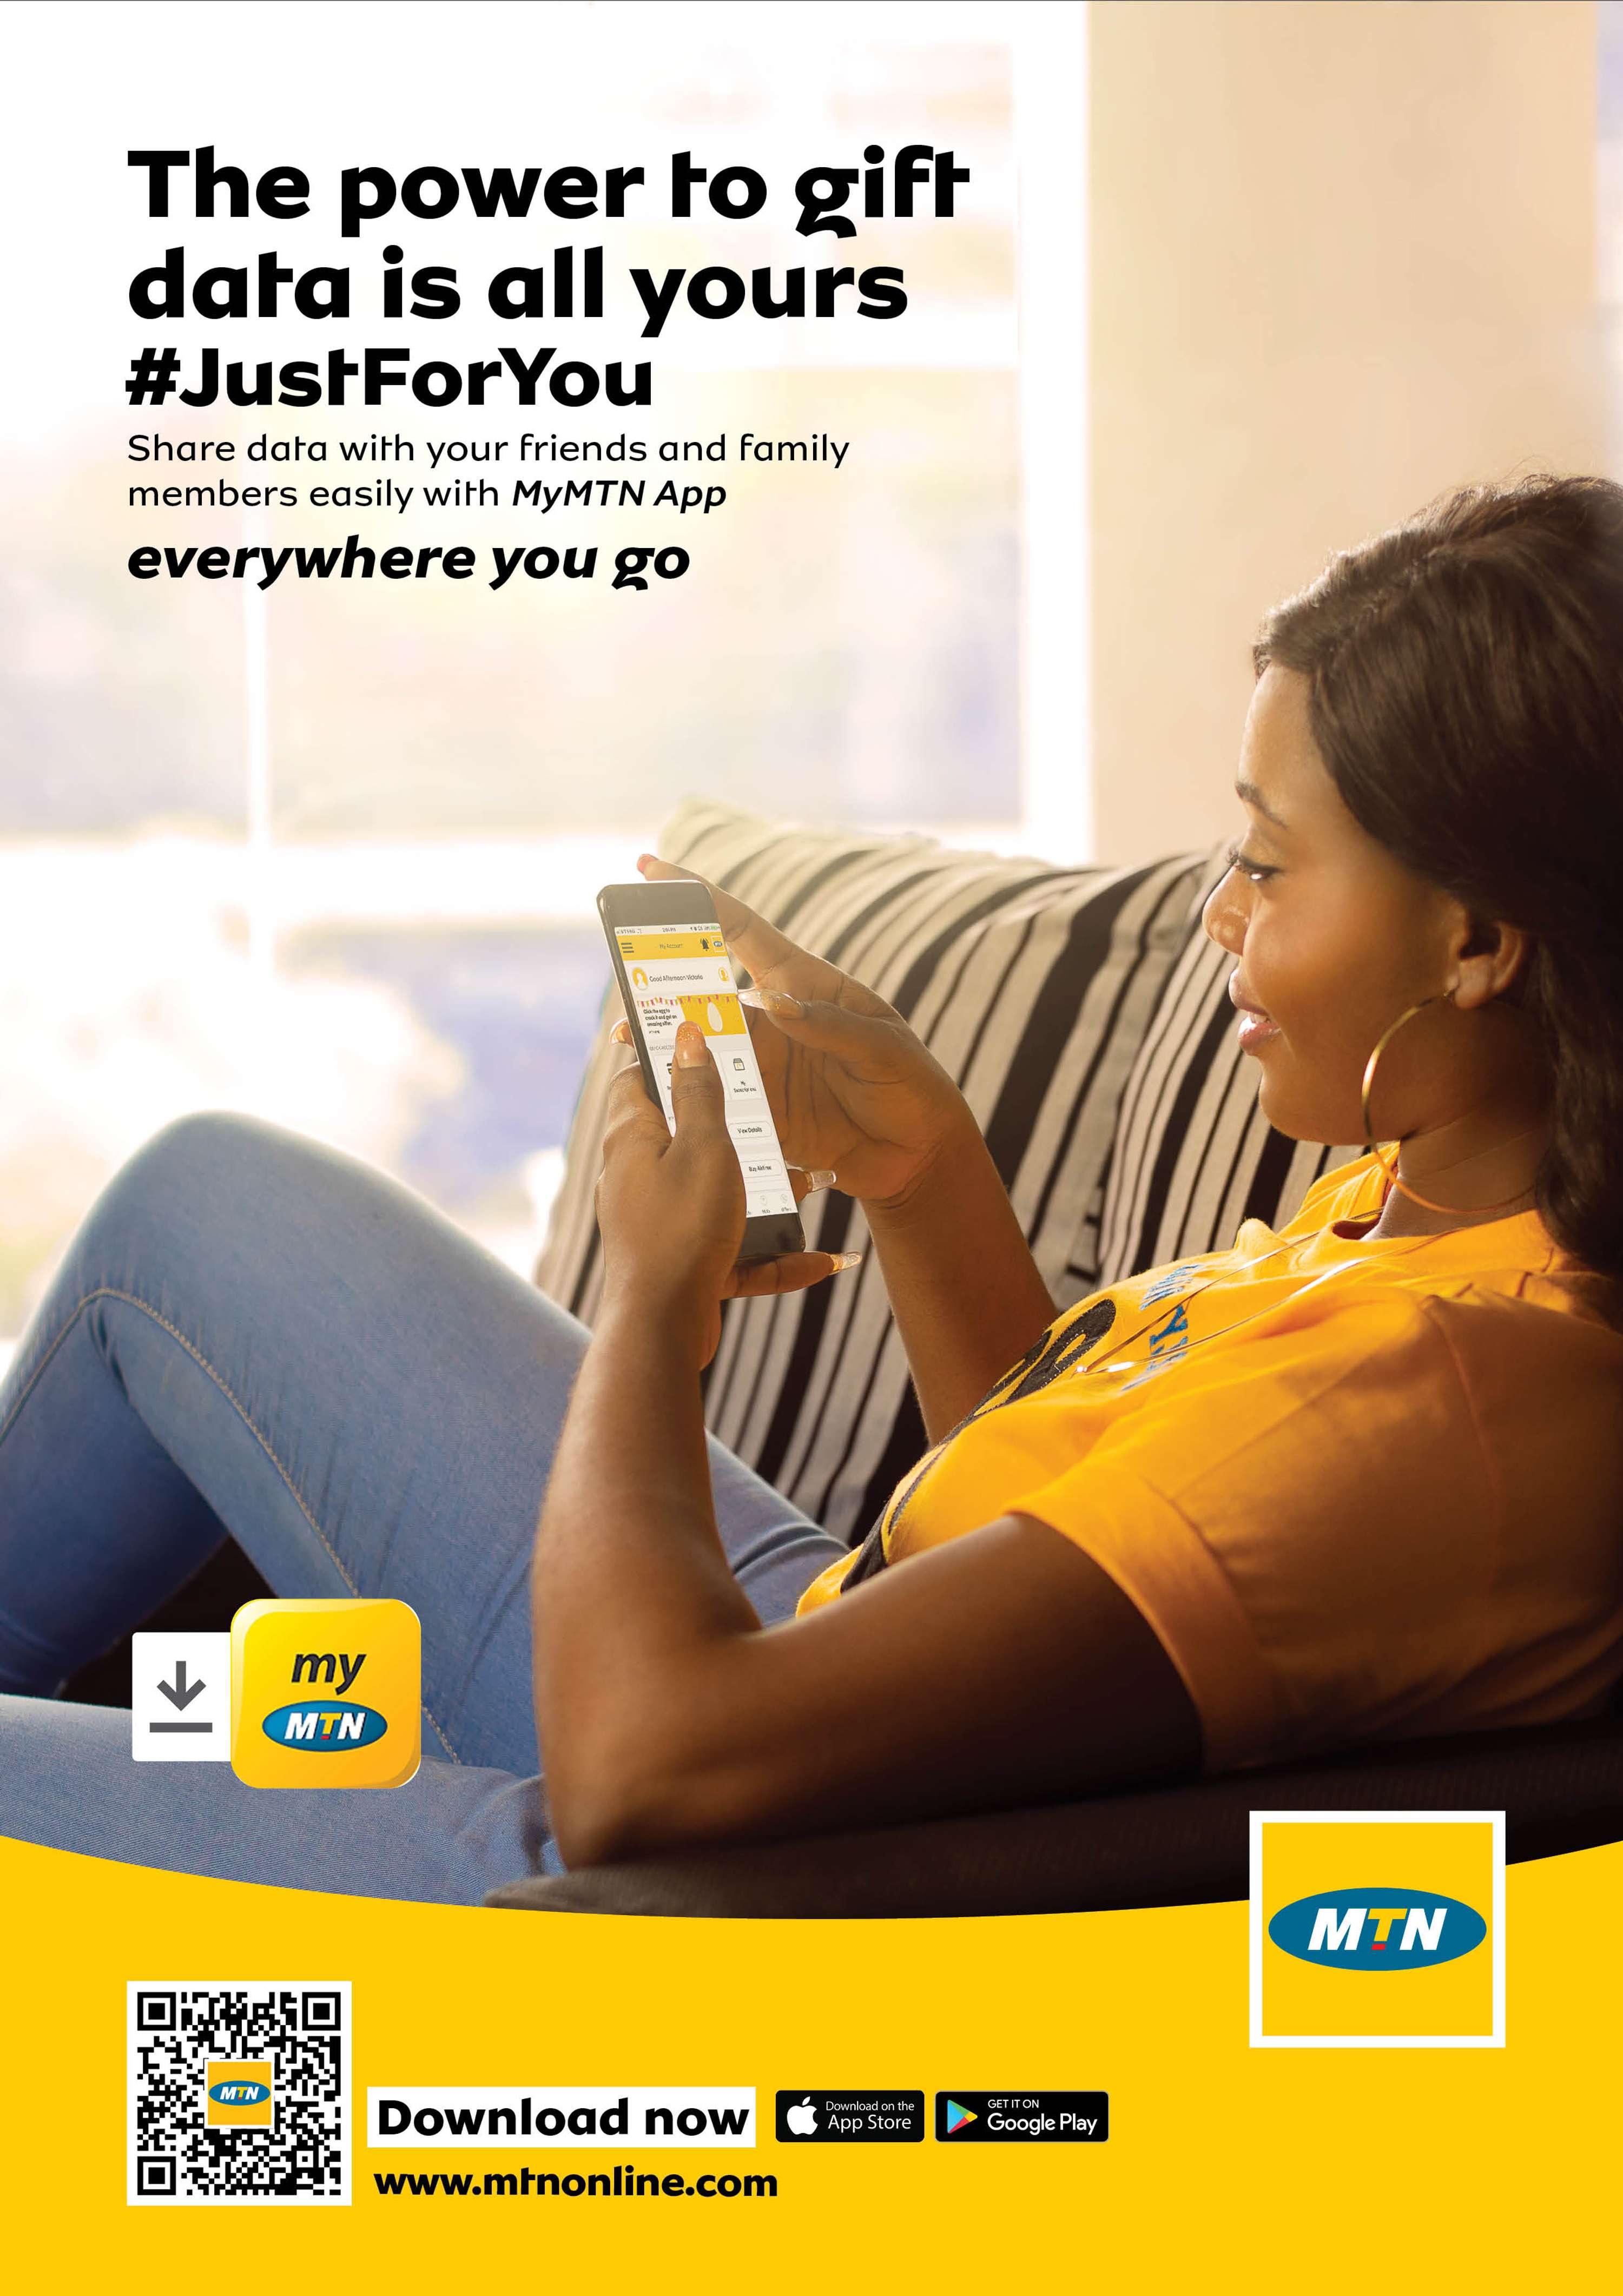 What you do today is what matters most 🤗 So, What are we doing today?  #GetInspired, By MTN Nigeria